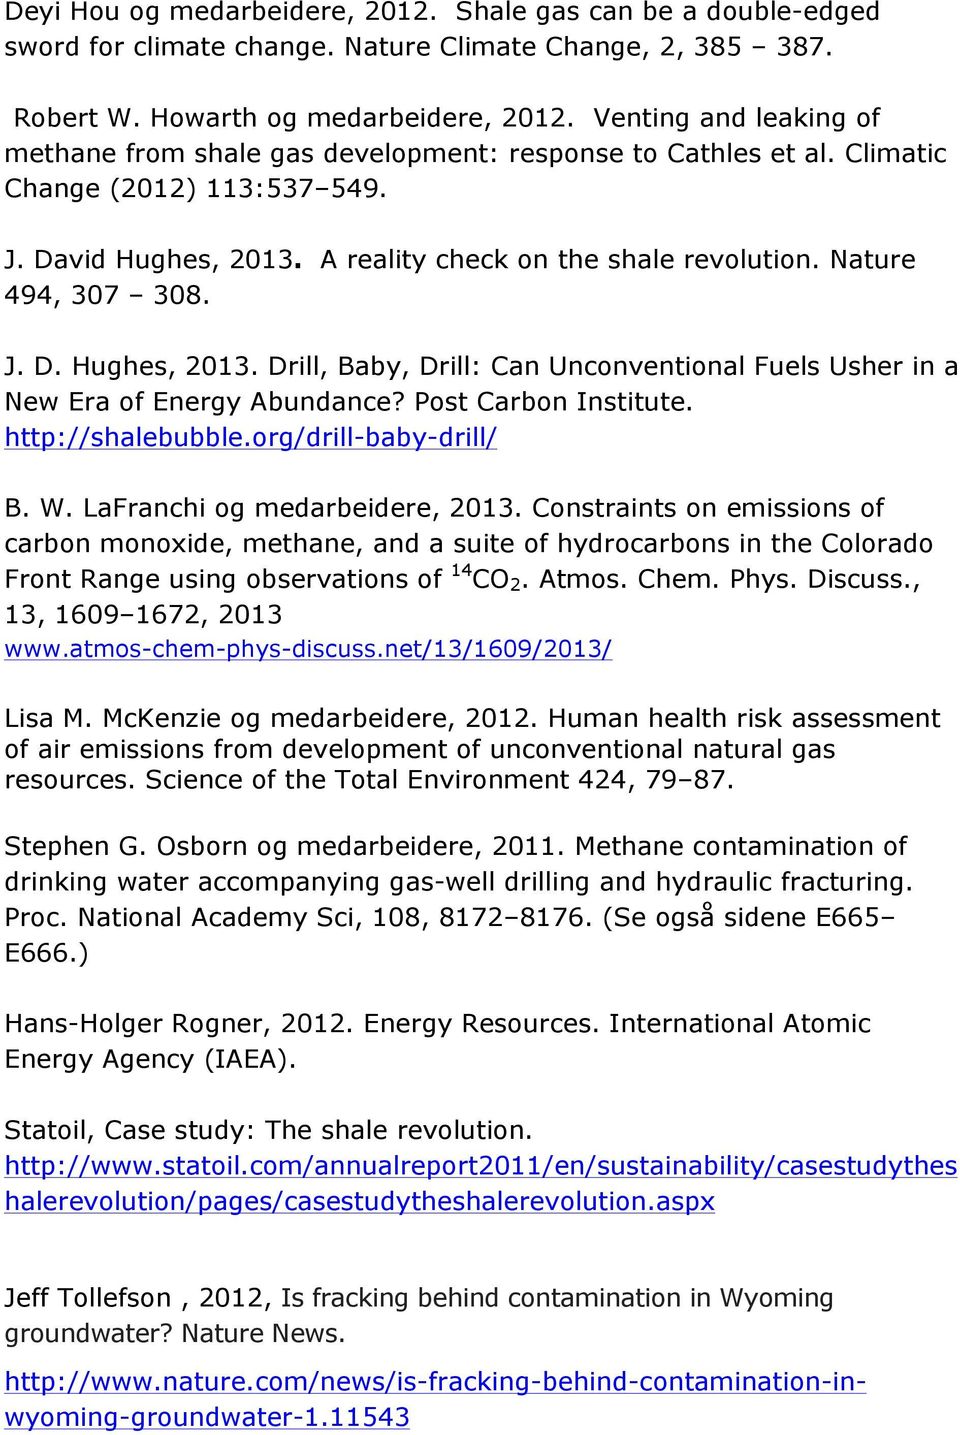 Nature 494, 307 308. J. D. Hughes, 2013. Drill, Baby, Drill: Can Unconventional Fuels Usher in a New Era of Energy Abundance? Post Carbon Institute. http://shalebubble.org/drill-baby-drill/ B. W.